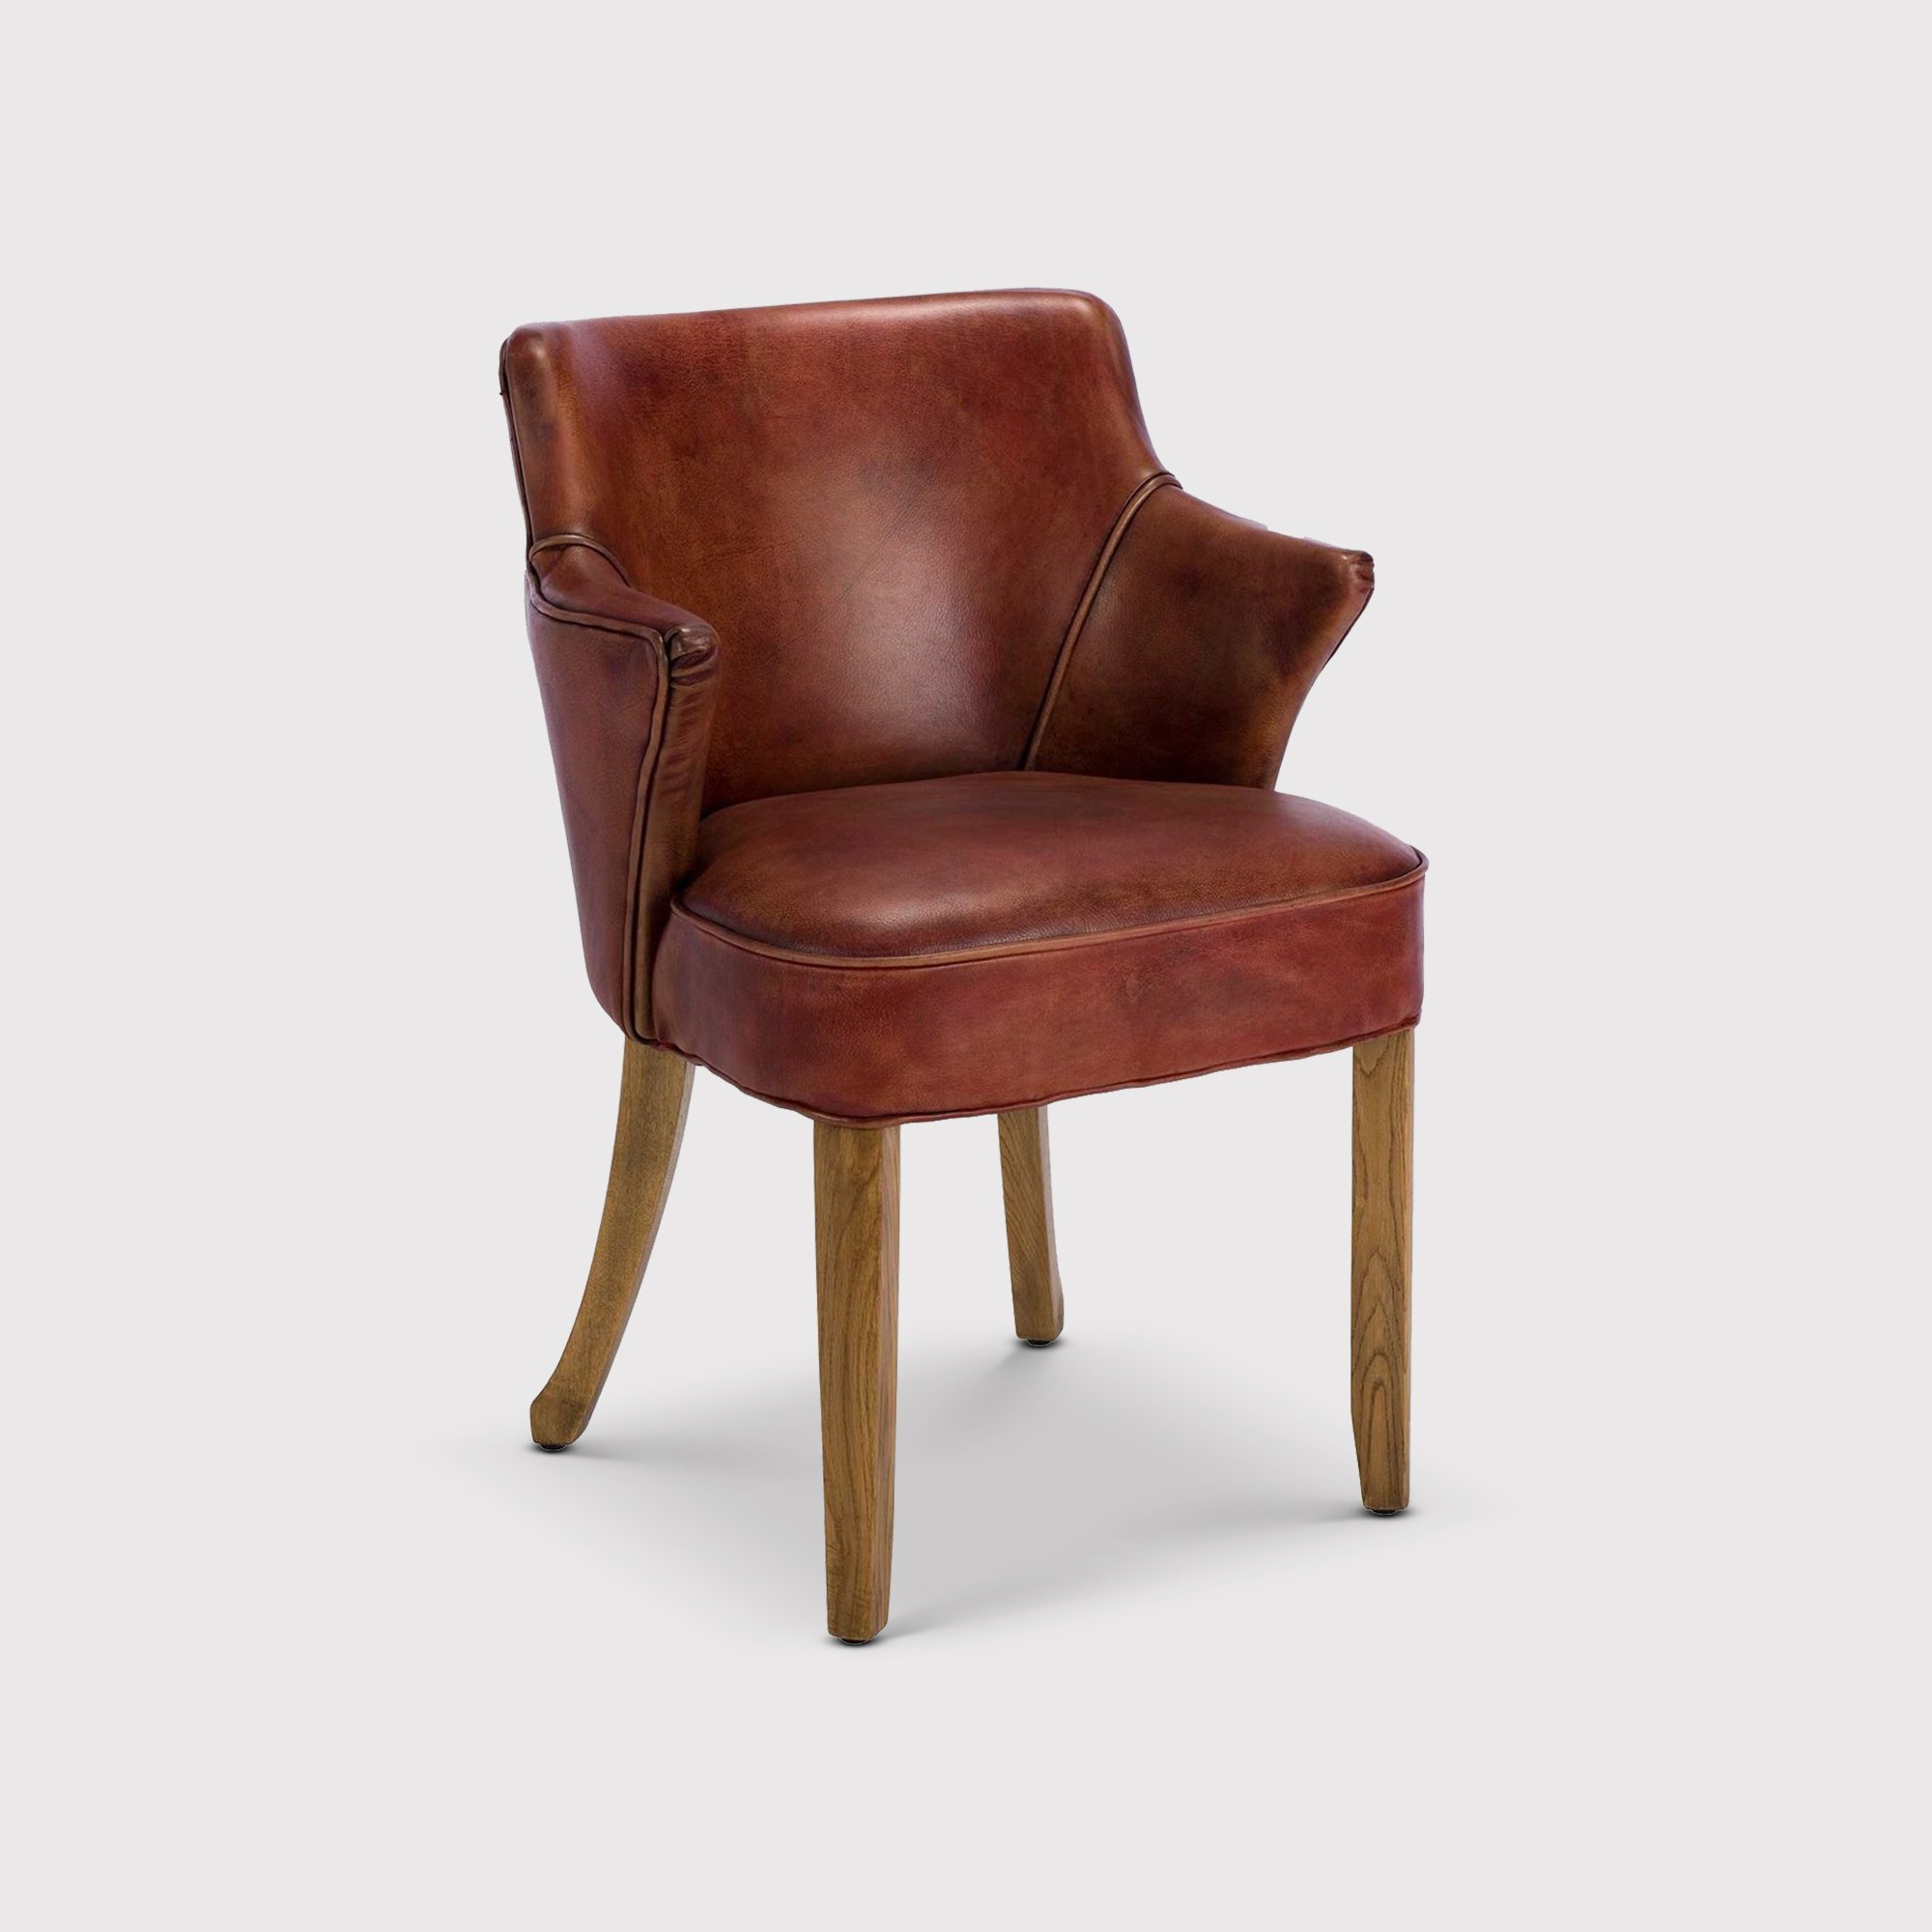 Timothy Oulton Lannister Dining Chair, Brown | Barker & Stonehouse